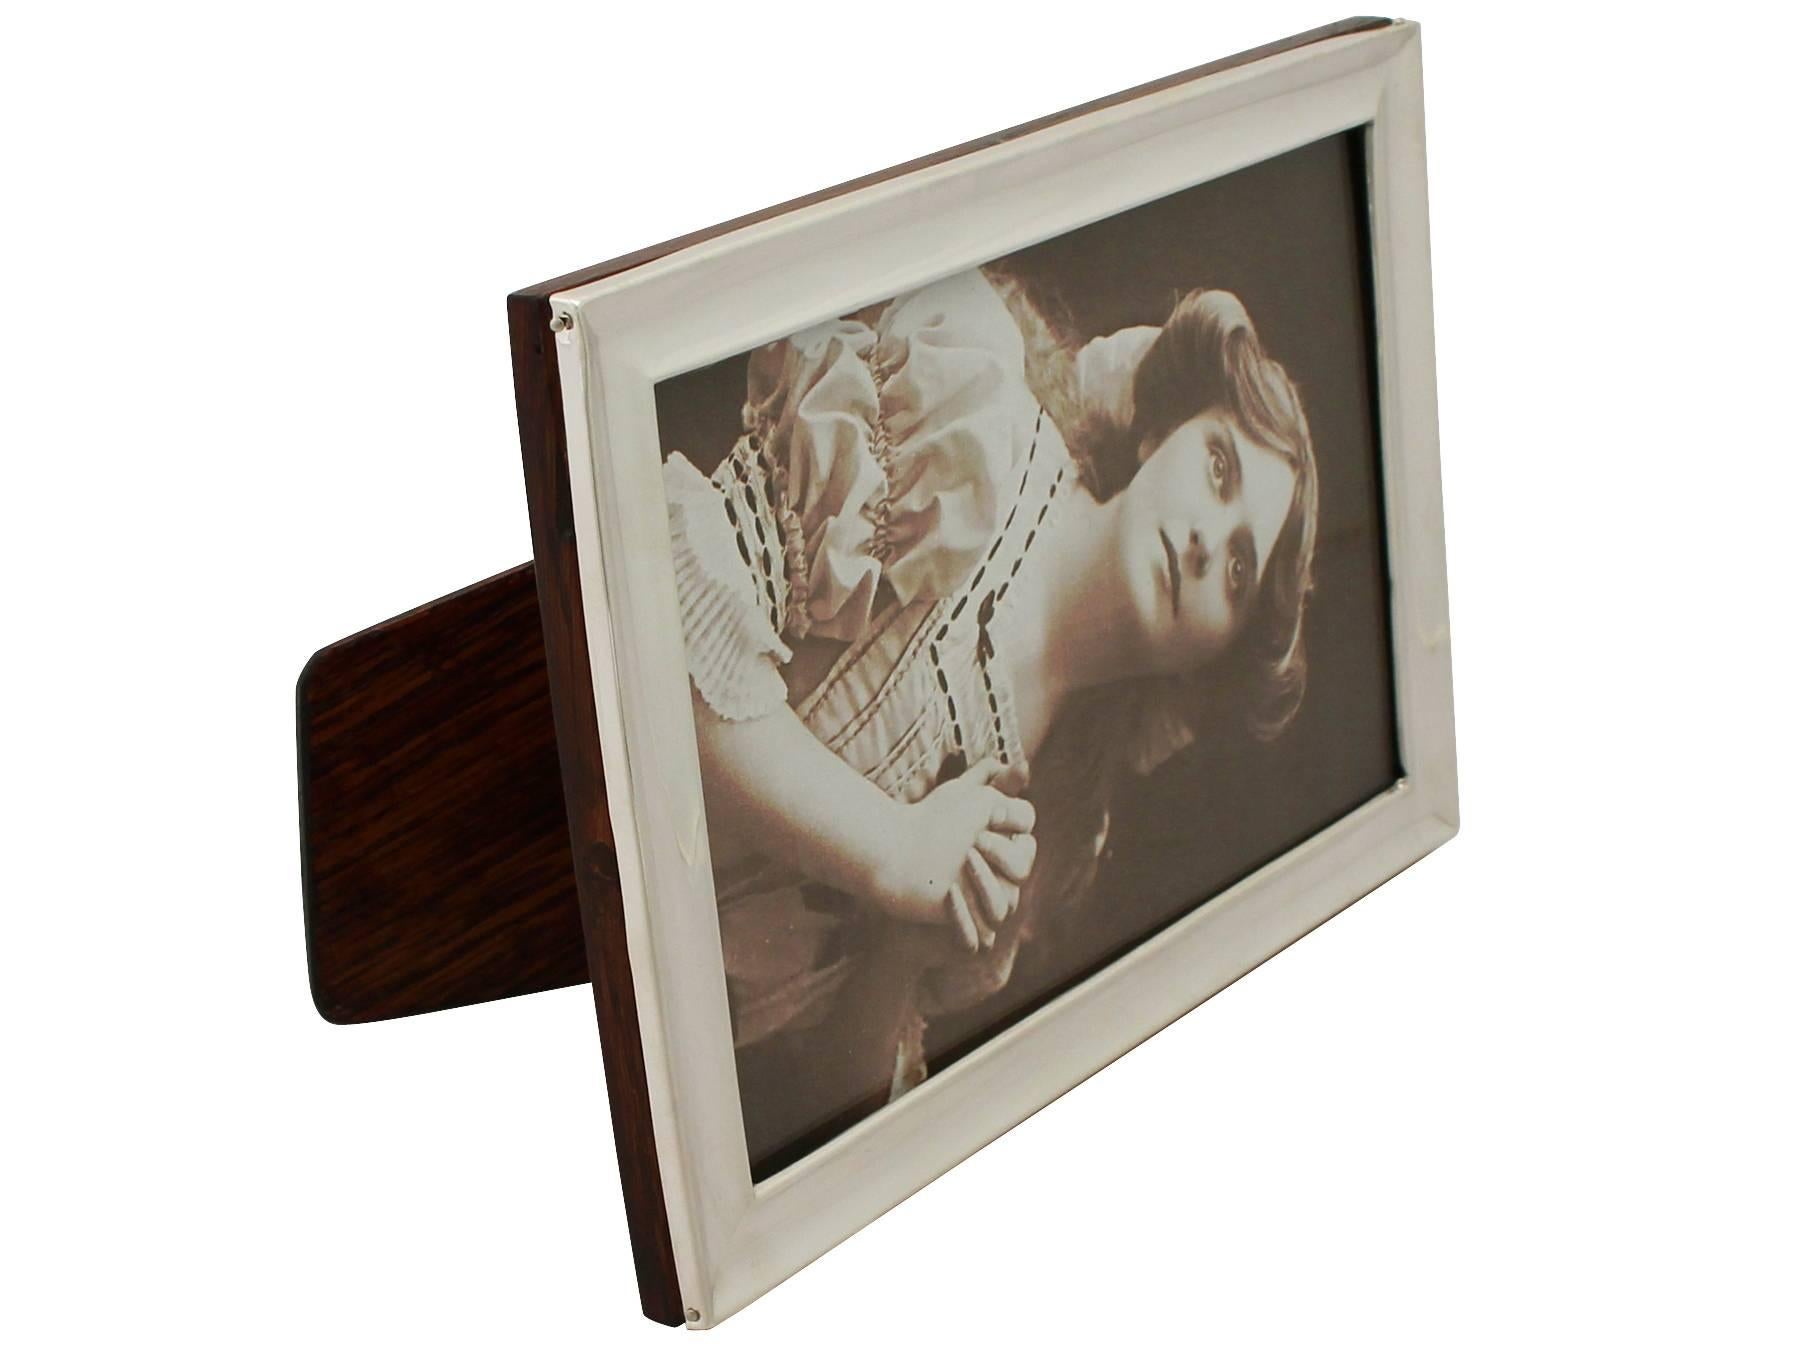 A fine and impressive antique George V English sterling silver photograph frame; an addition to our collection of ornamental silverware.

This fine antique George V sterling silver photograph frame has a plain rectangular form.

The surface of